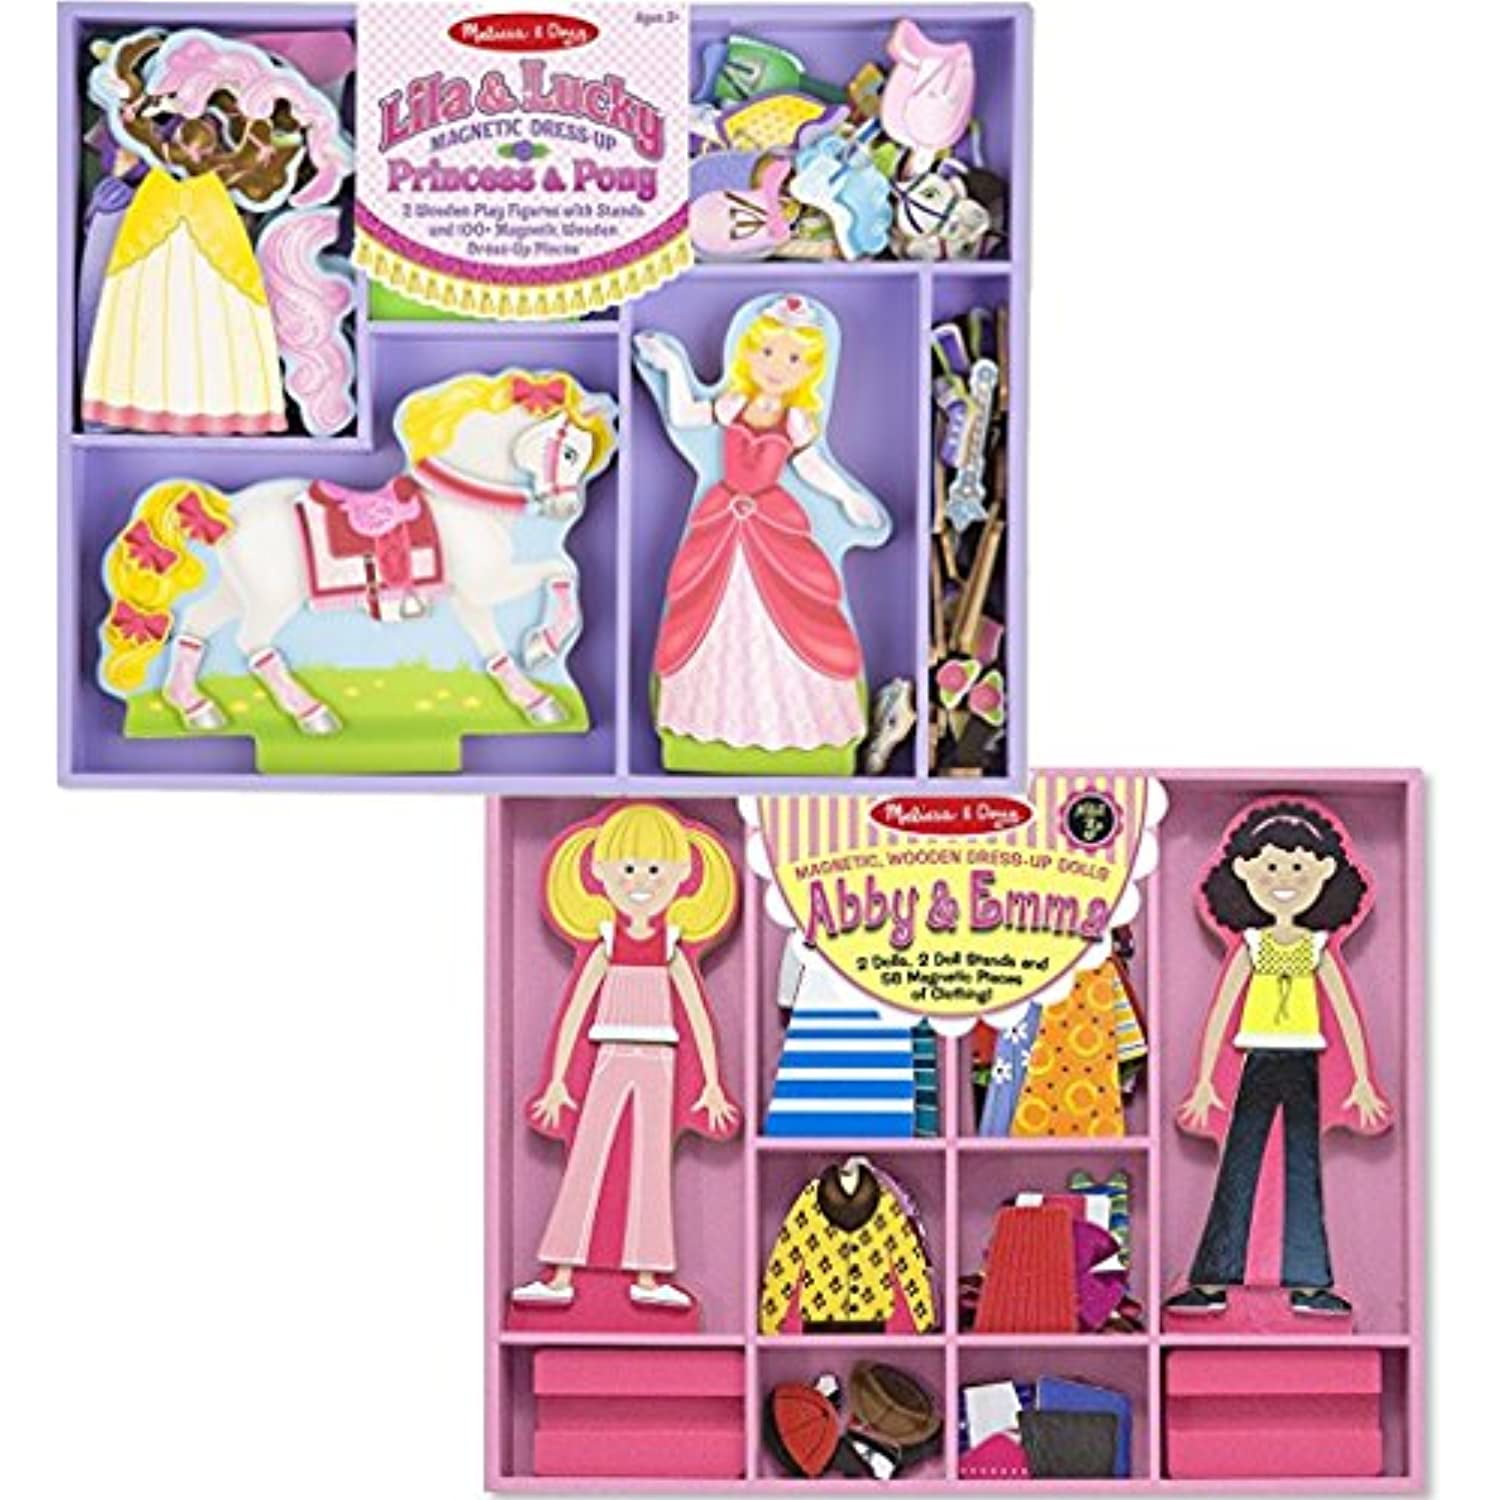 Melissa & Doug Bundle Includes 2 Items Lila and Lucky Wooden Dress-Up Princess Doll and Horse with Magnetic Accessories pcs Abby and Emma Deluxe Magnetic Wood Dress-Up - Walmart.com